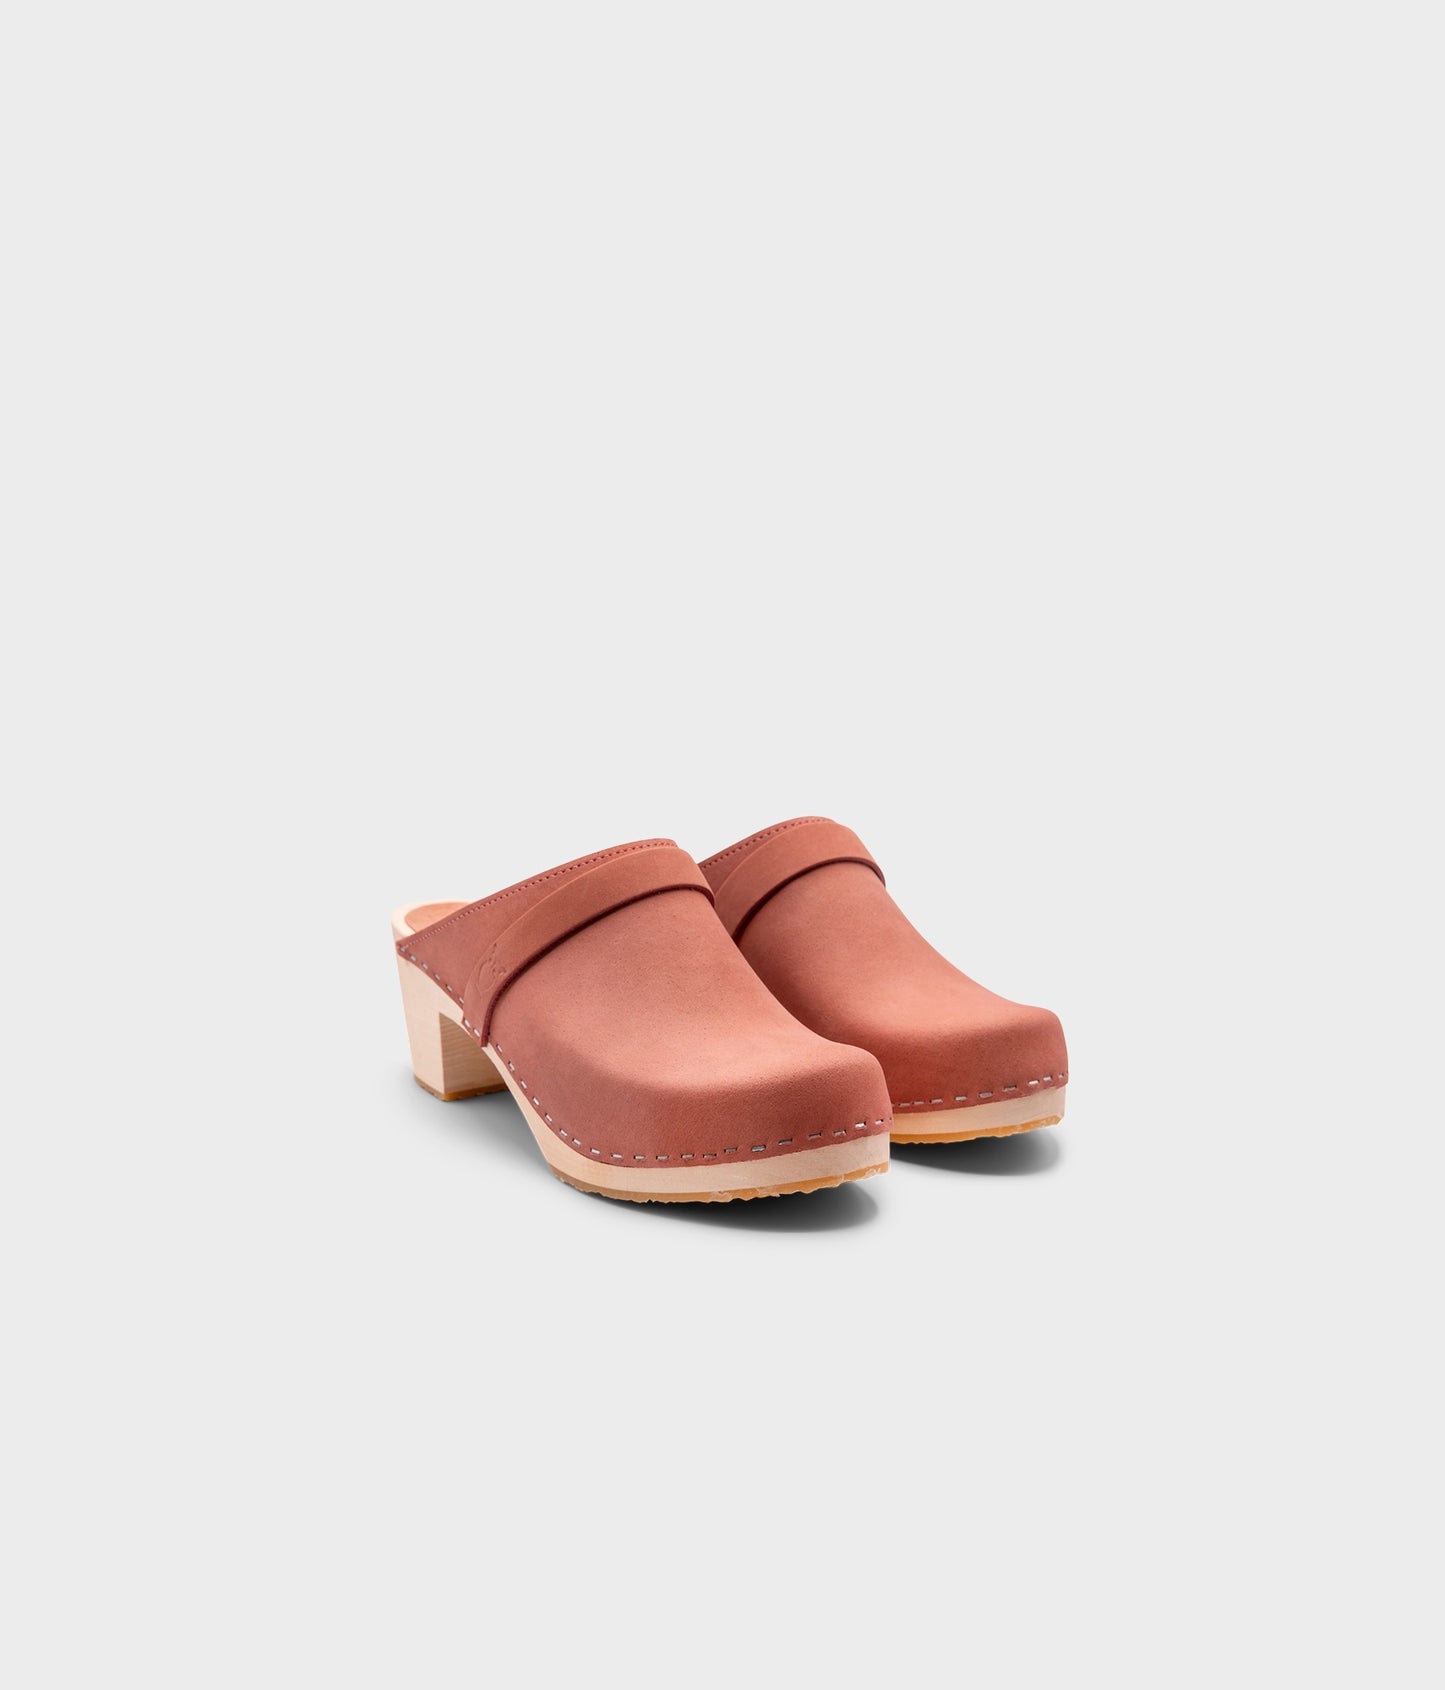 classic high heeled clog mule in blush pink nubuck leather stapled on a light wooden base with a leather strap